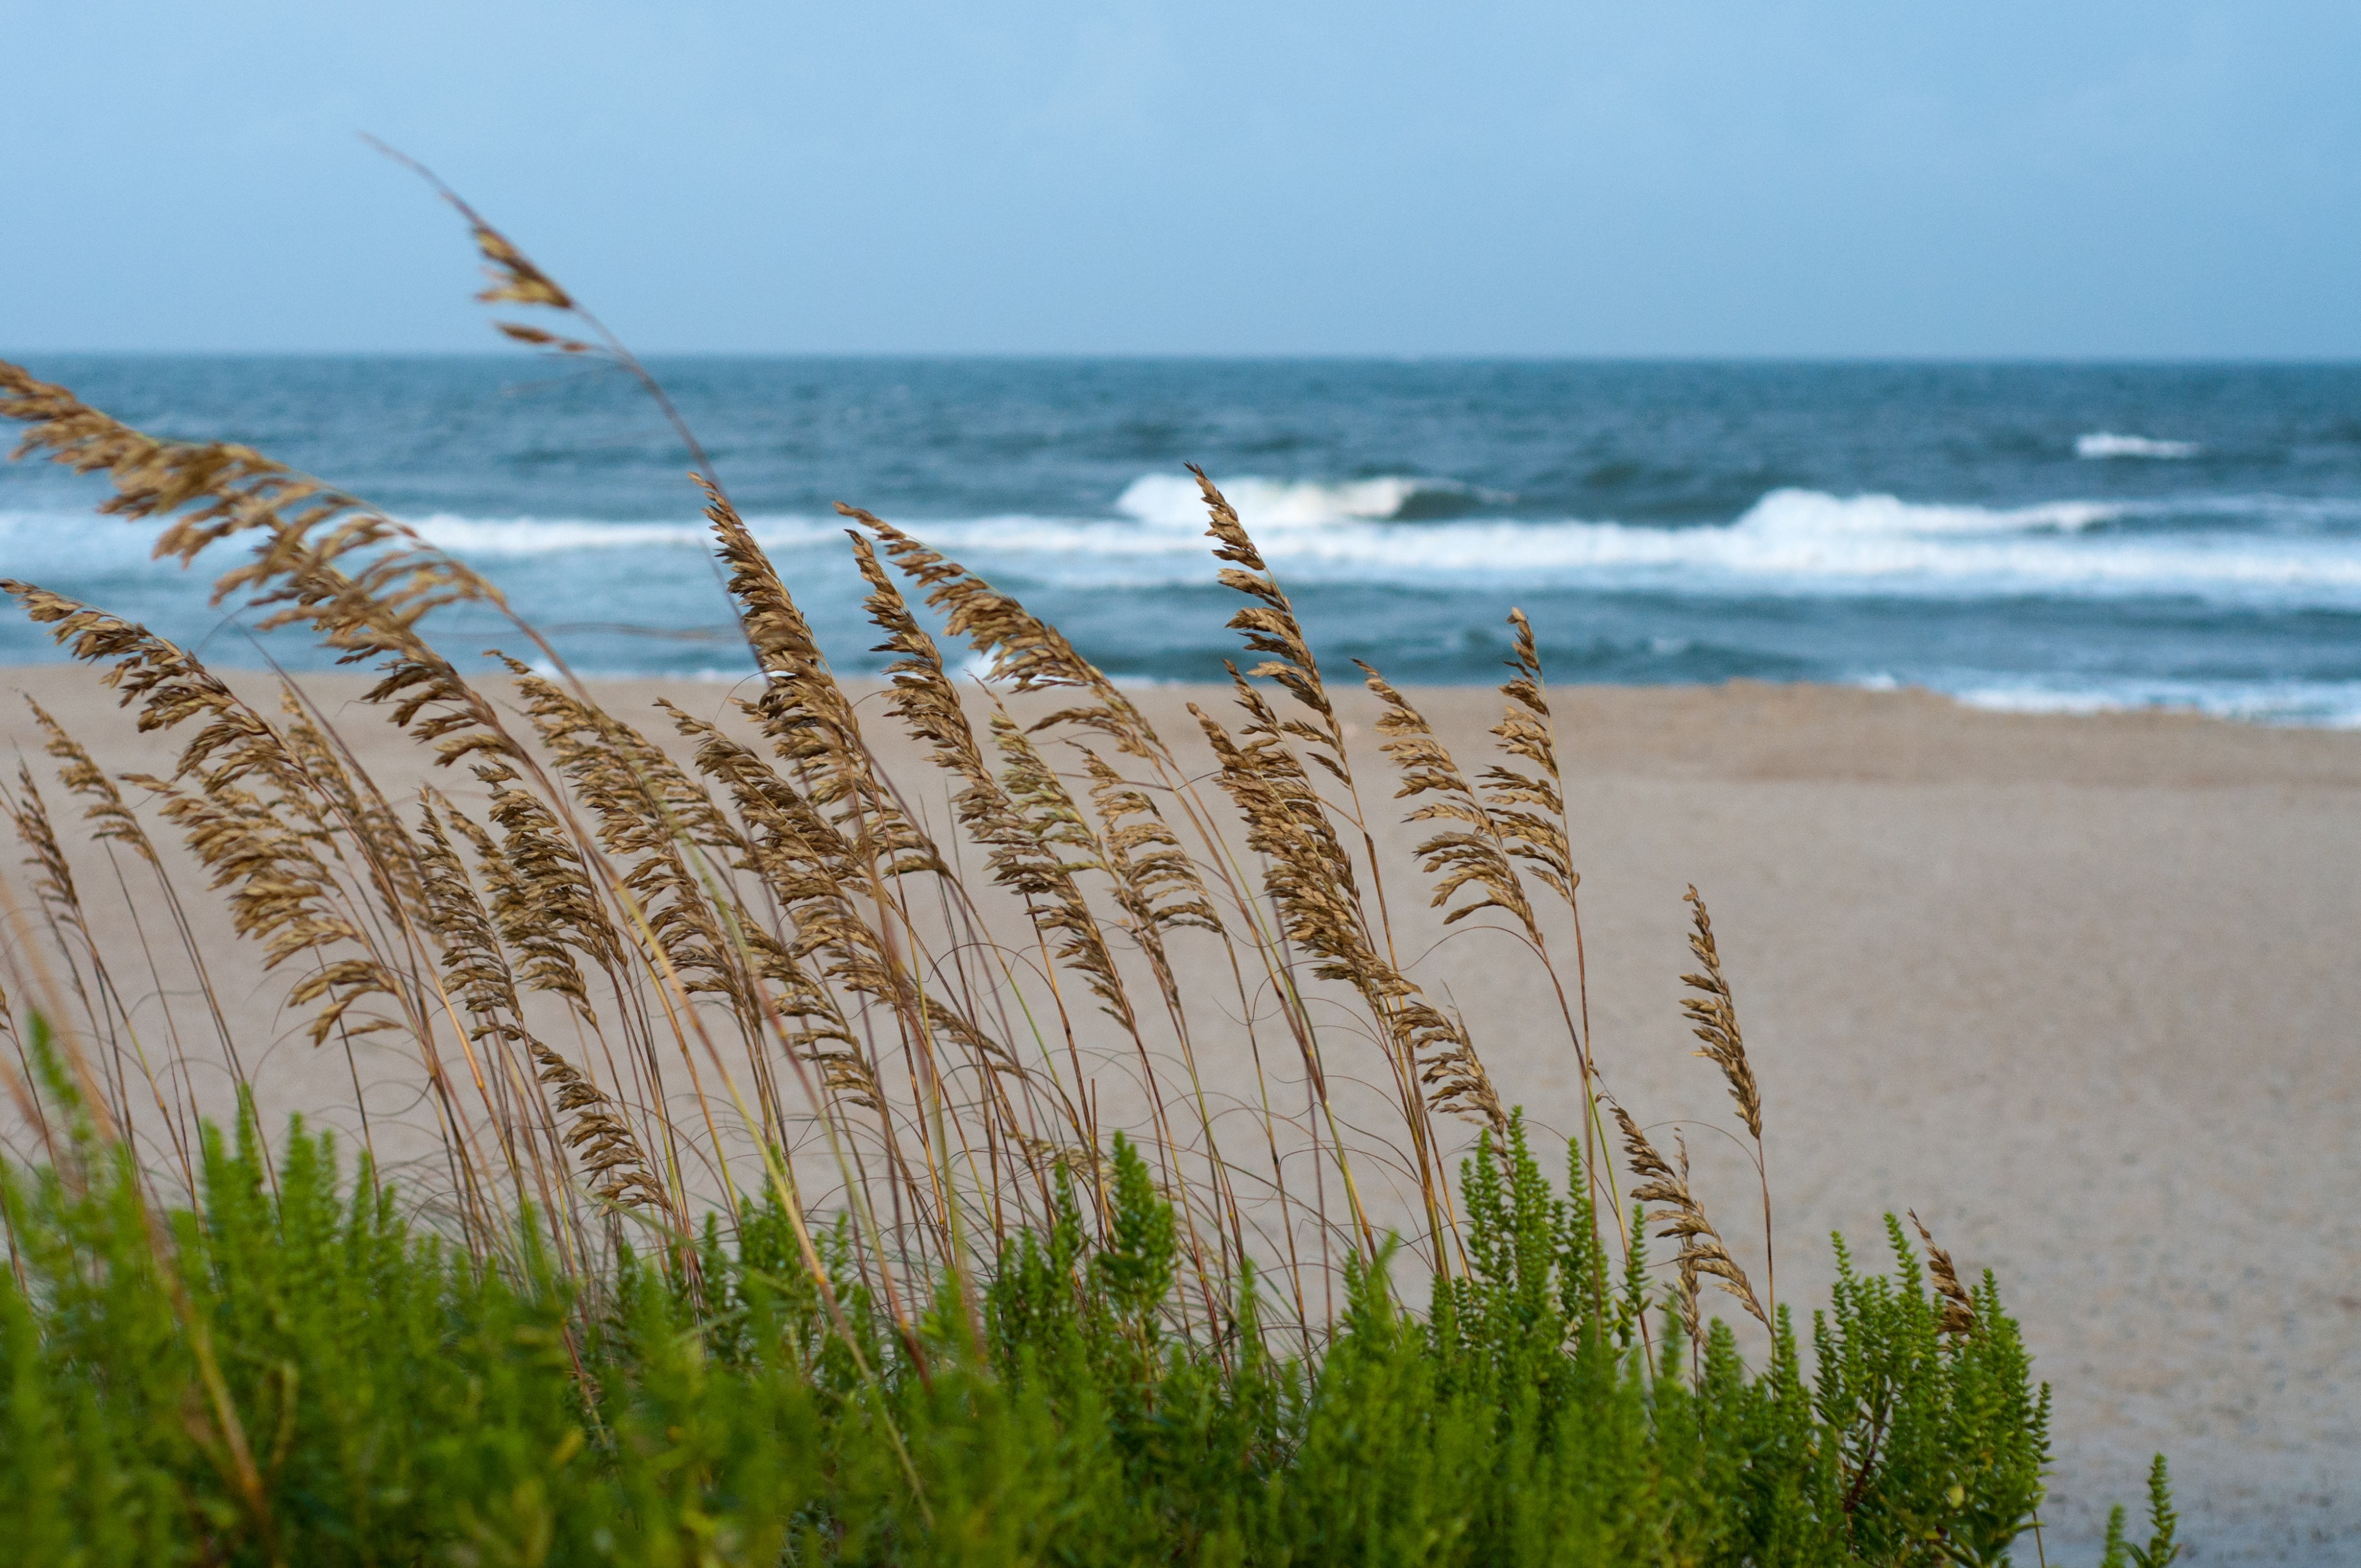 General 4096x2720 beach plants outdoors nature